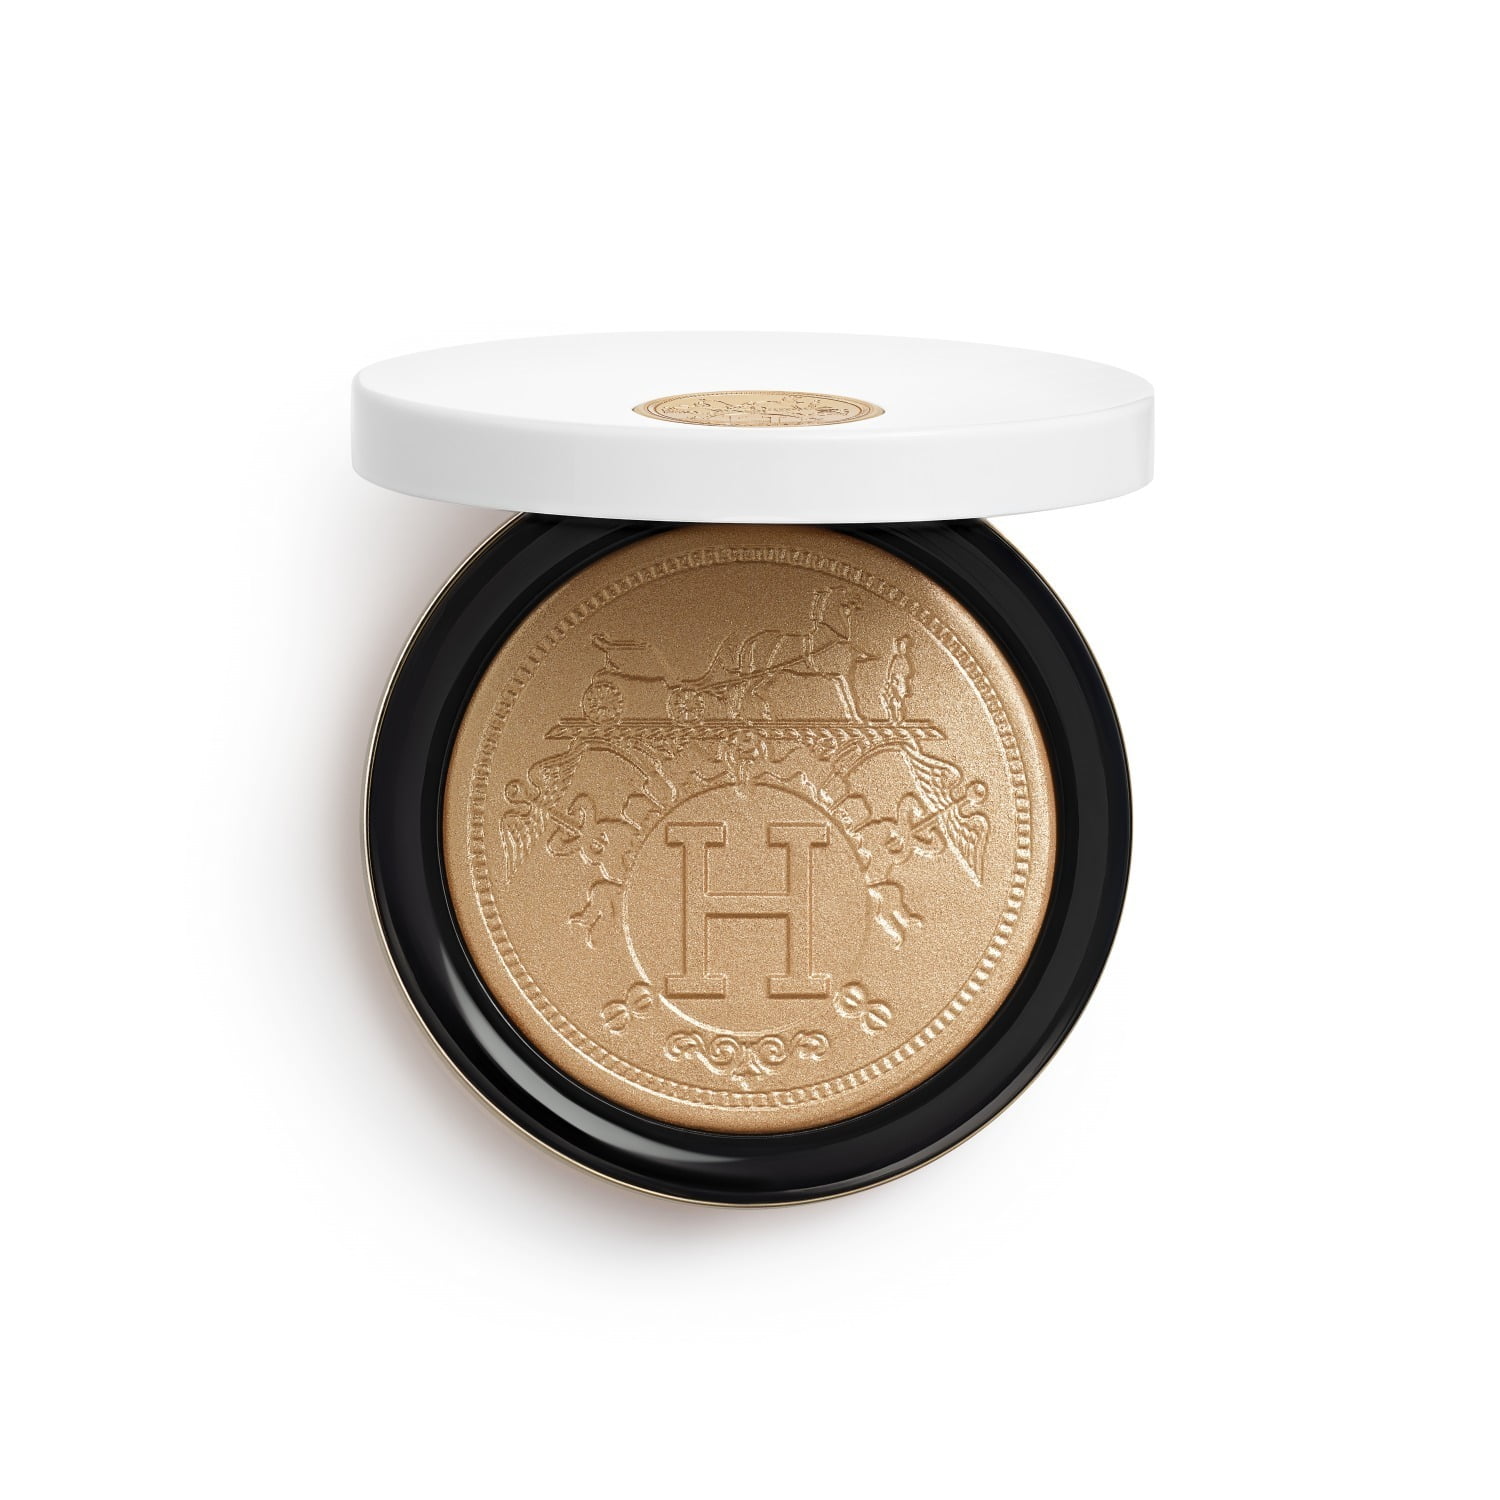 HERMÈS 2021 Fall/Winter Limited Edition face and eye powder